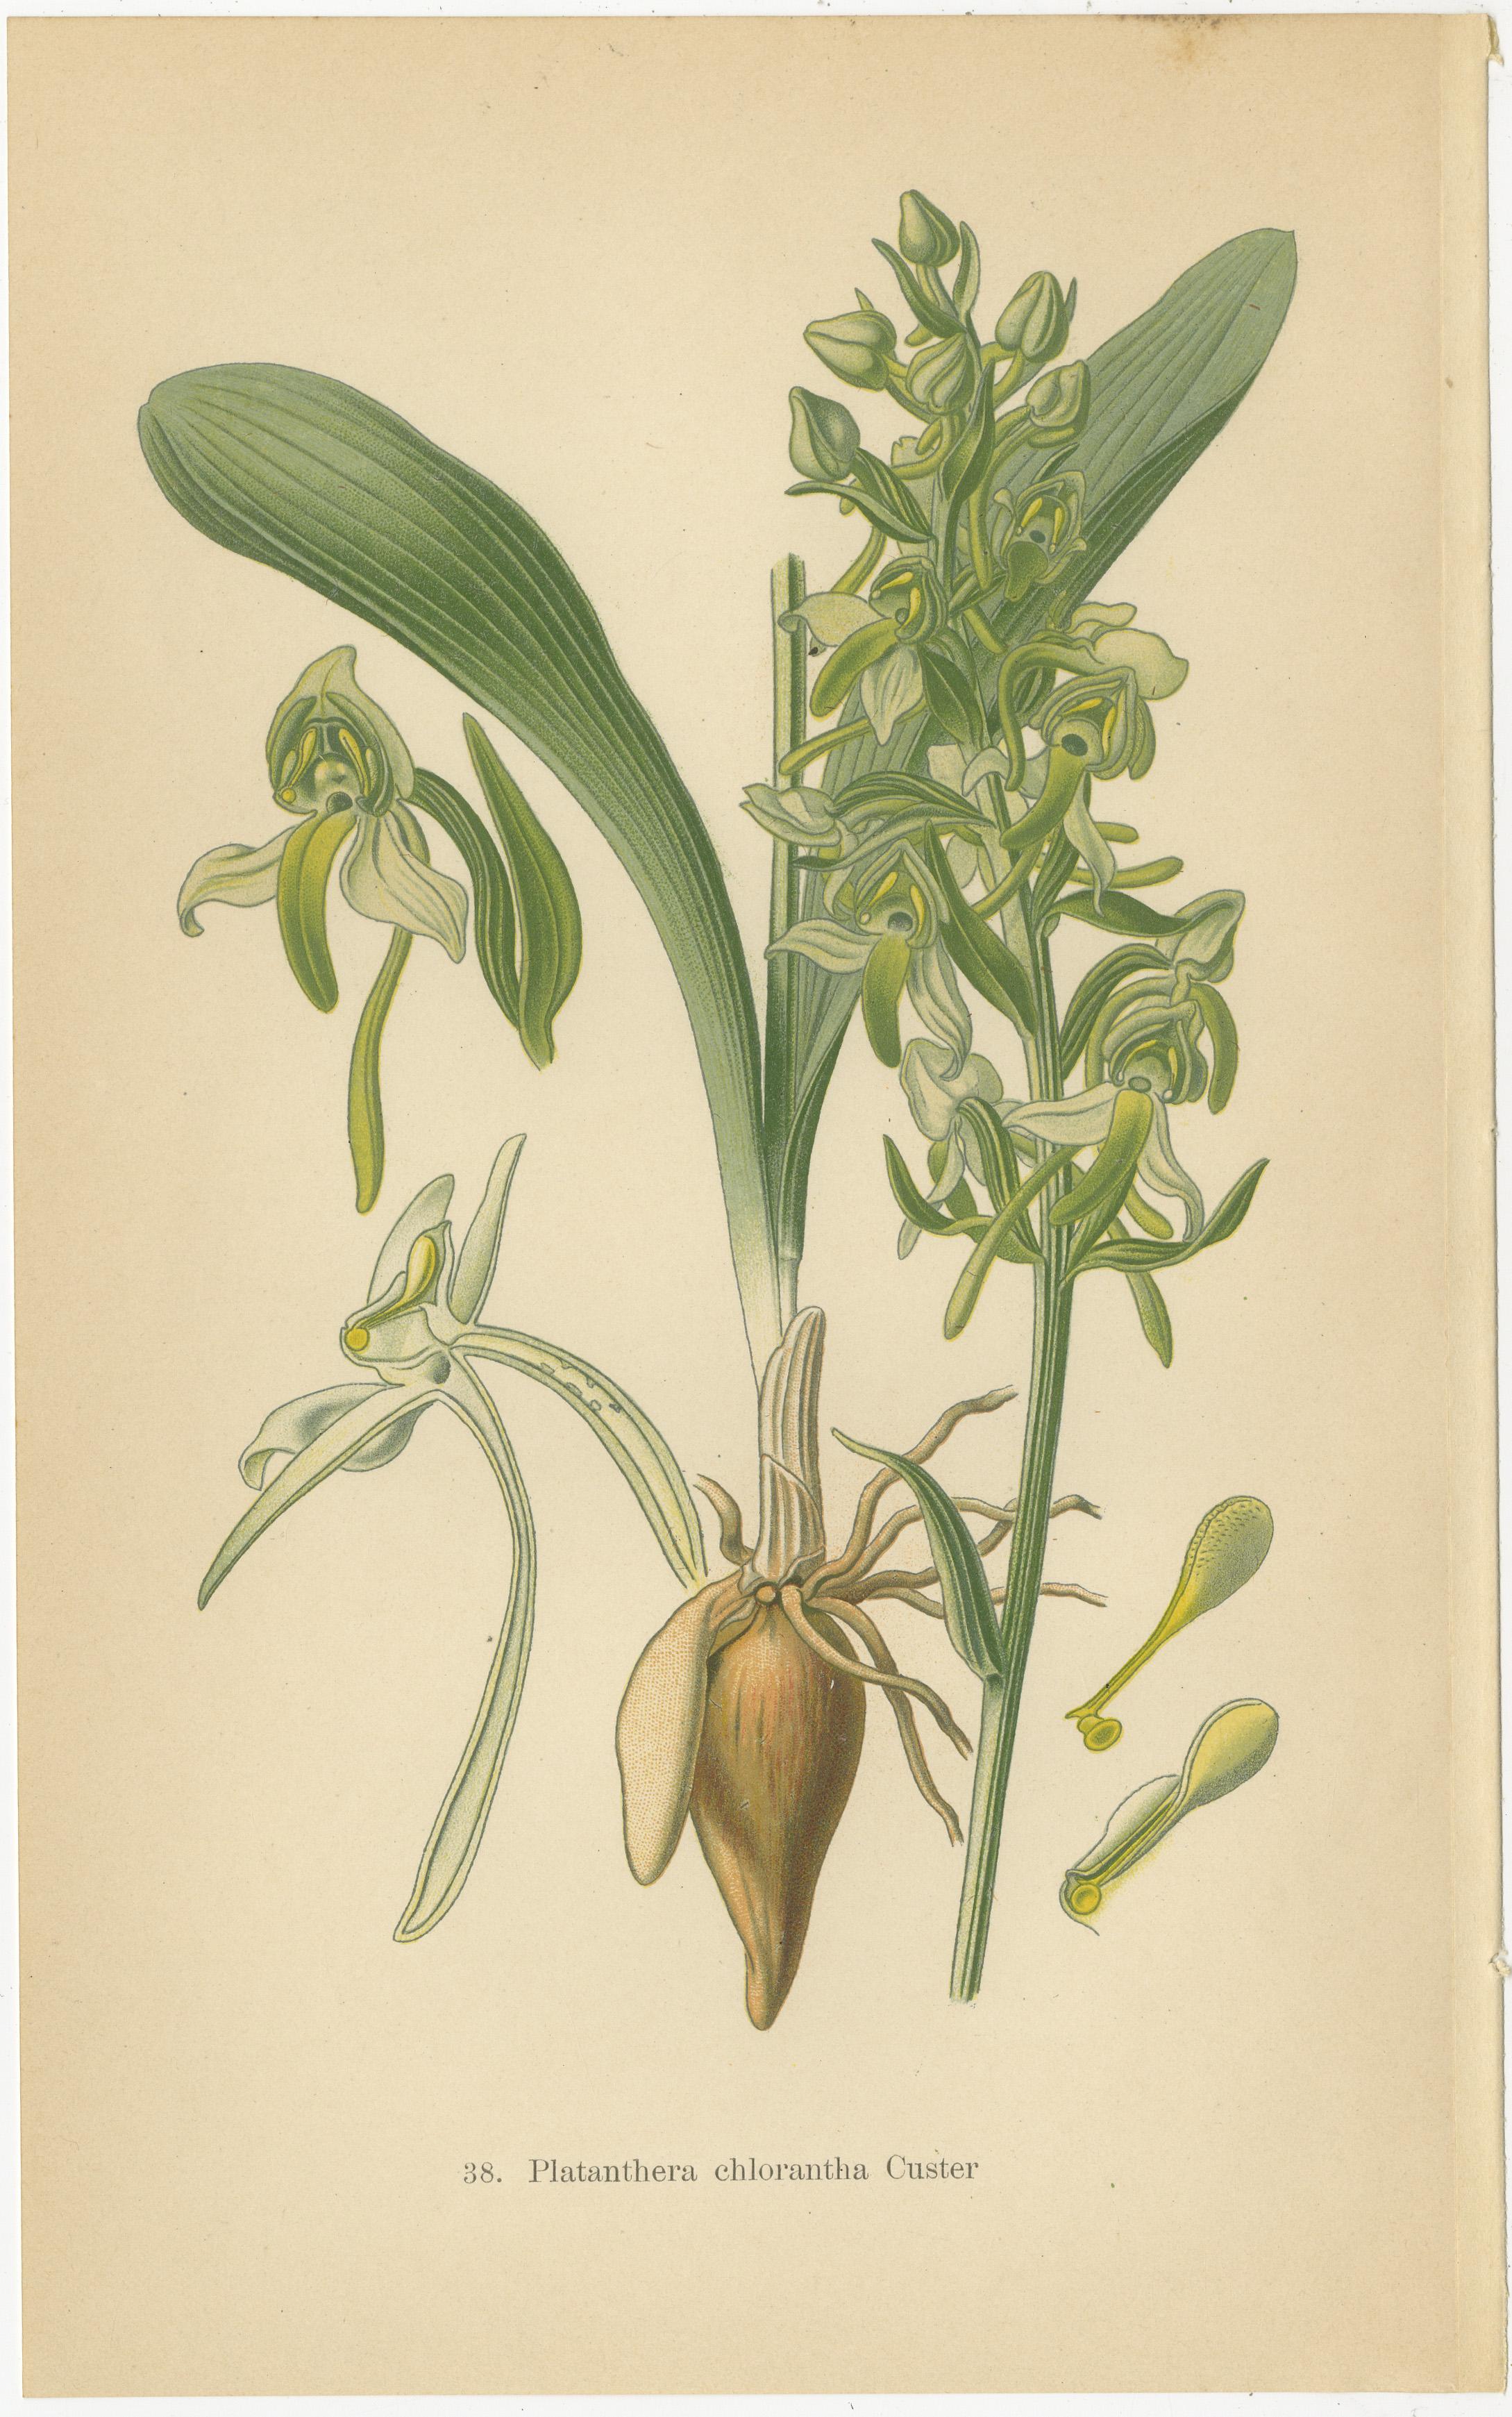 These original antique botanical illustrations are from Walter Müller's 1904 publication, which showcases the foundational forms of orchid species found in Germany and surrounding areas. The detailed artwork from this era often served both